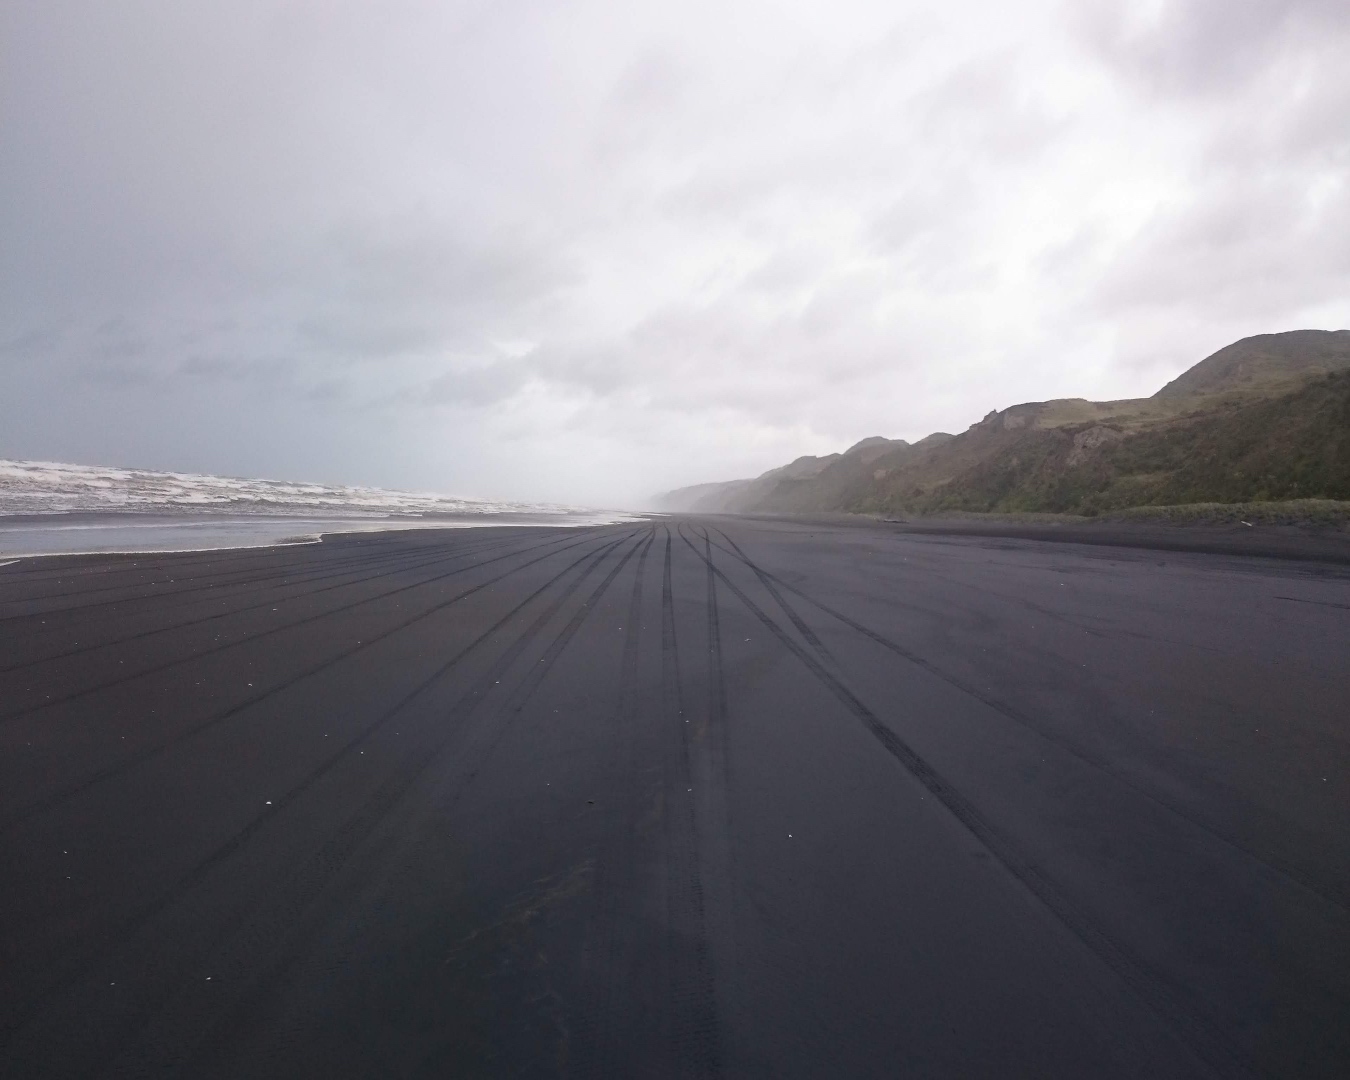 Car tracks disappearing off into the mist along the black sands of a beach. 